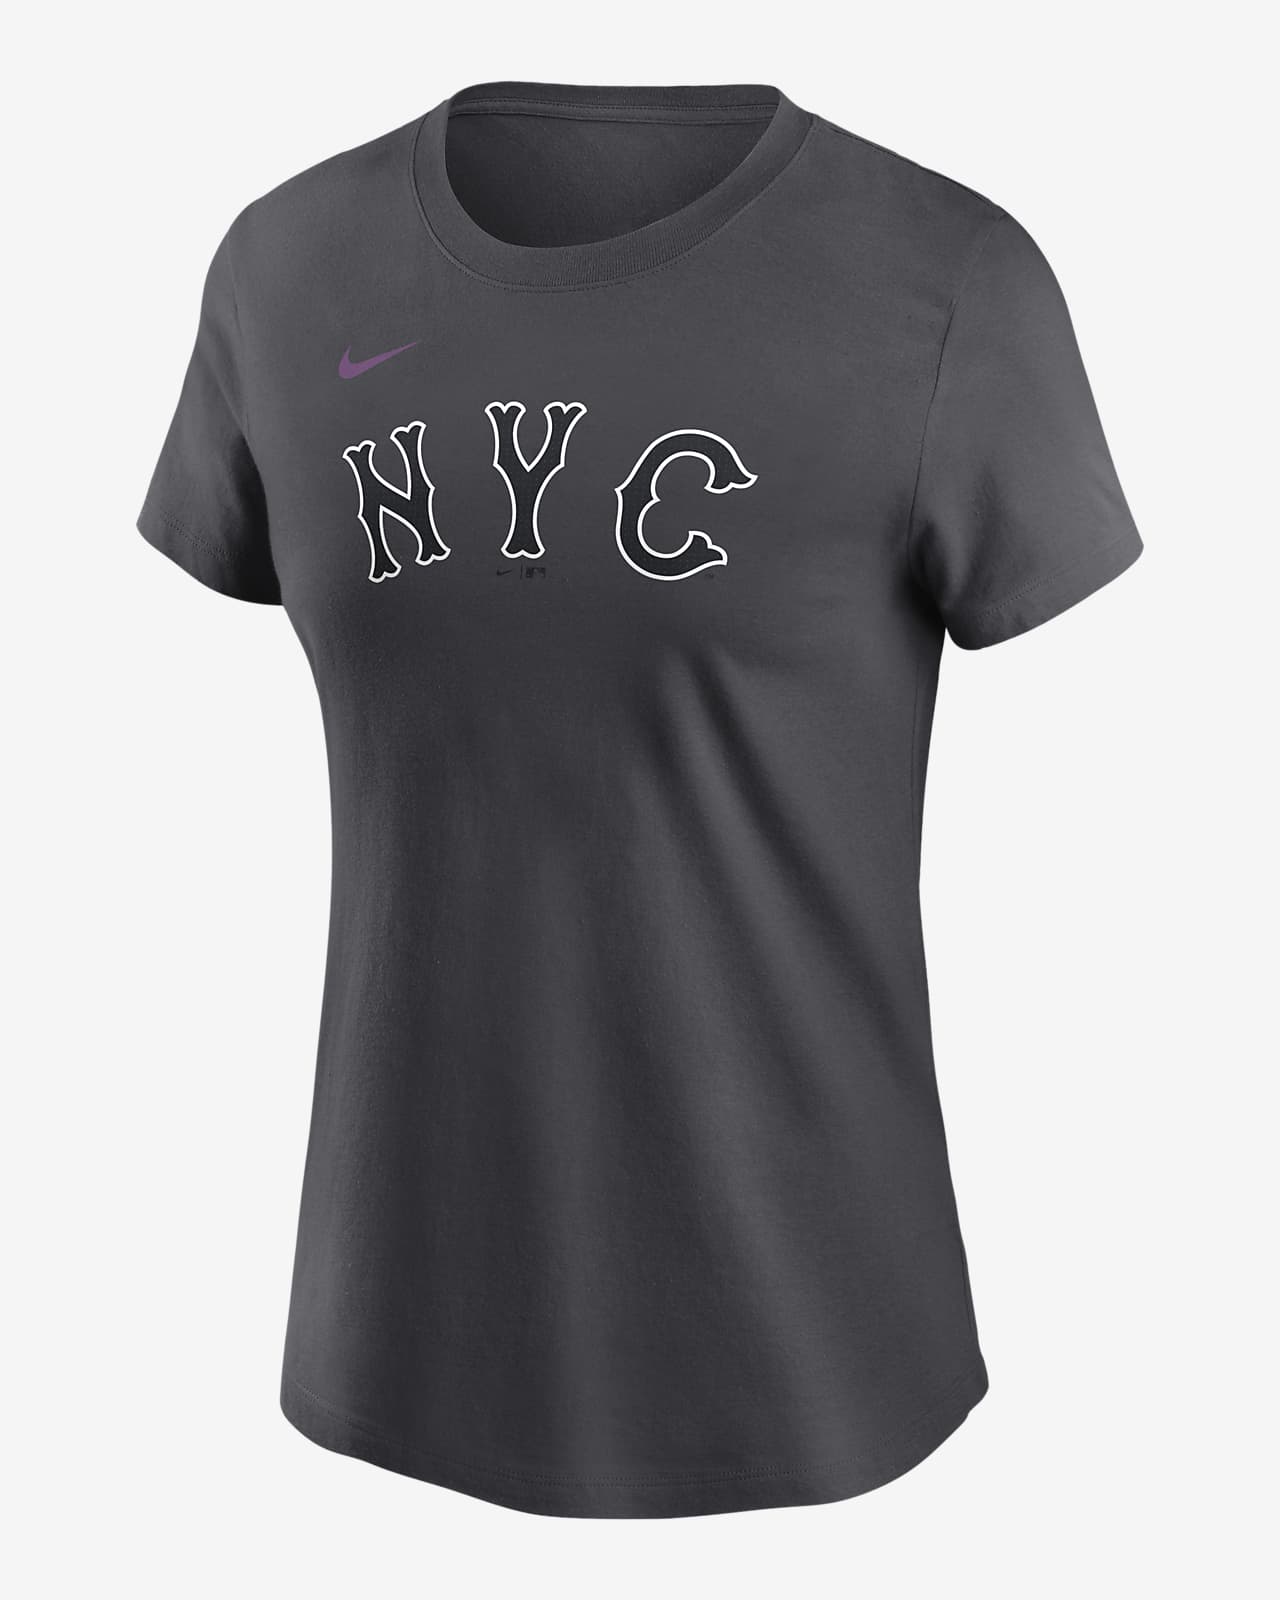 Francisco Lindor New York Mets City Connect Fuse Women's Nike MLB T-Shirt